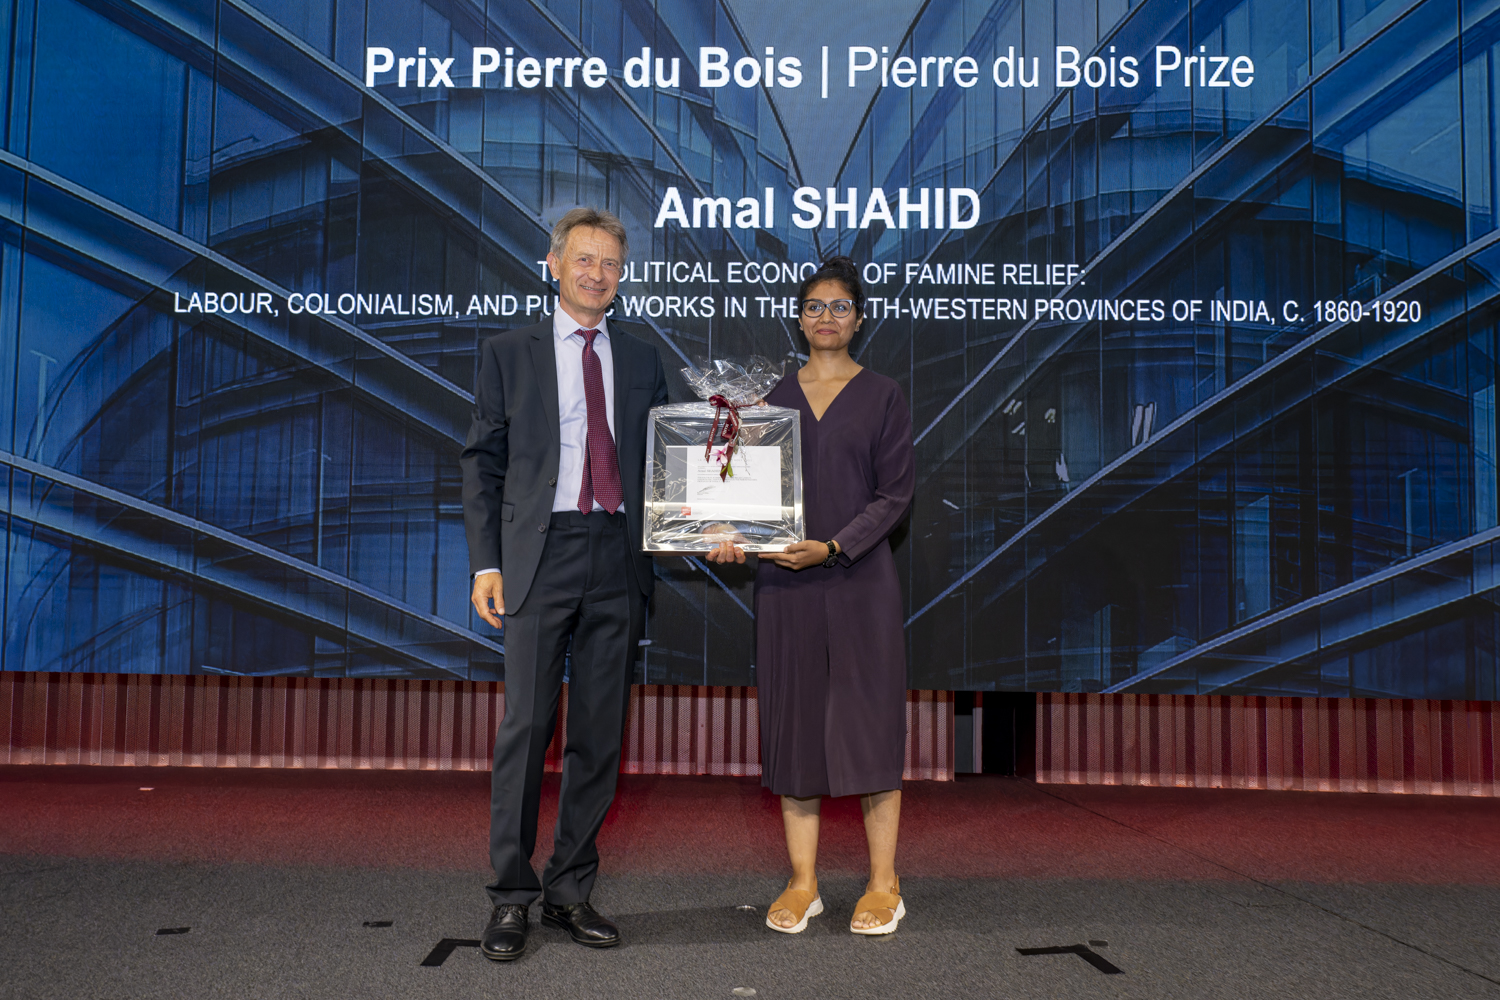 Amal Shahid’s thesis is awarded the 2023 Pierre du Bois Prize